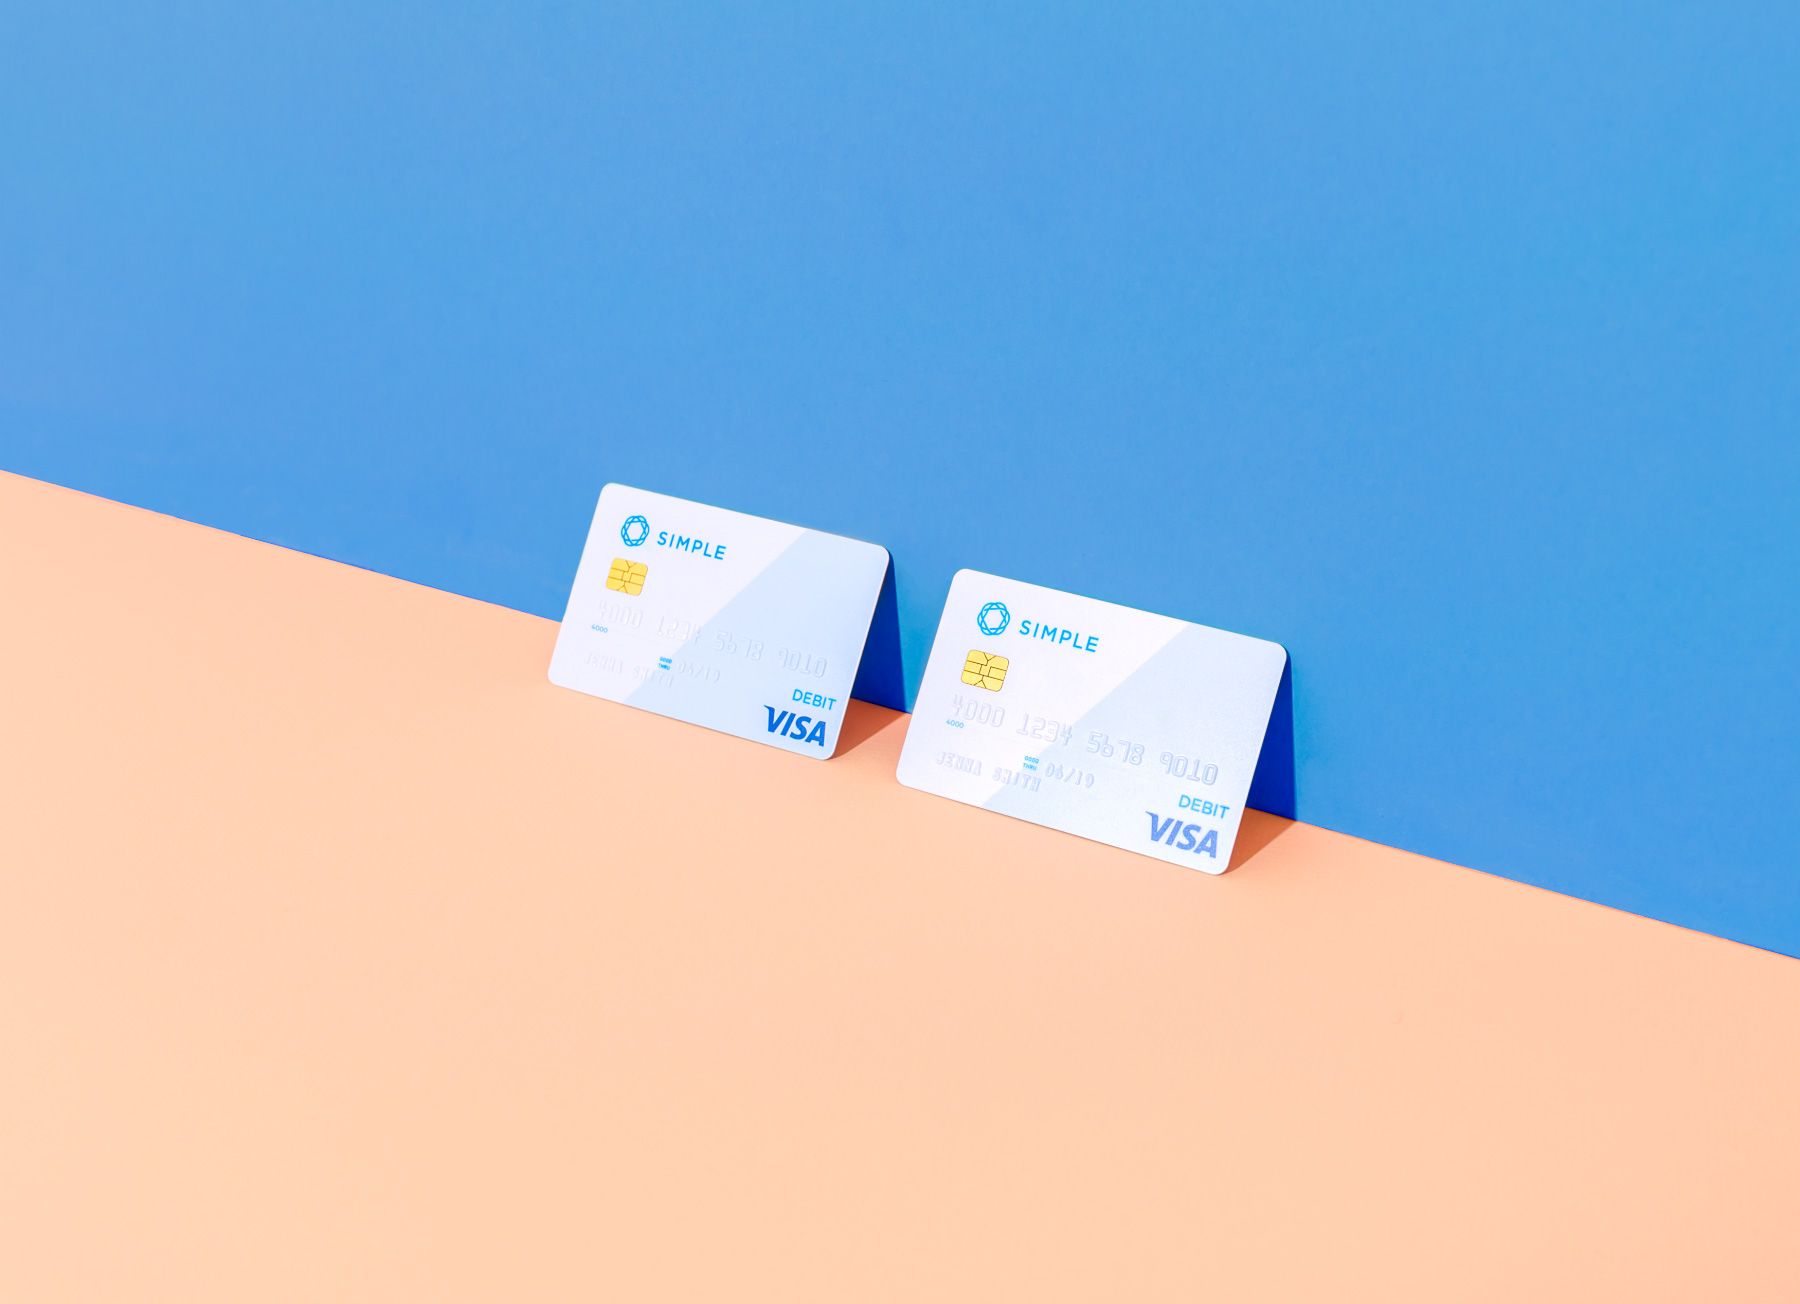 Shared debit card from Simple, which is two colors